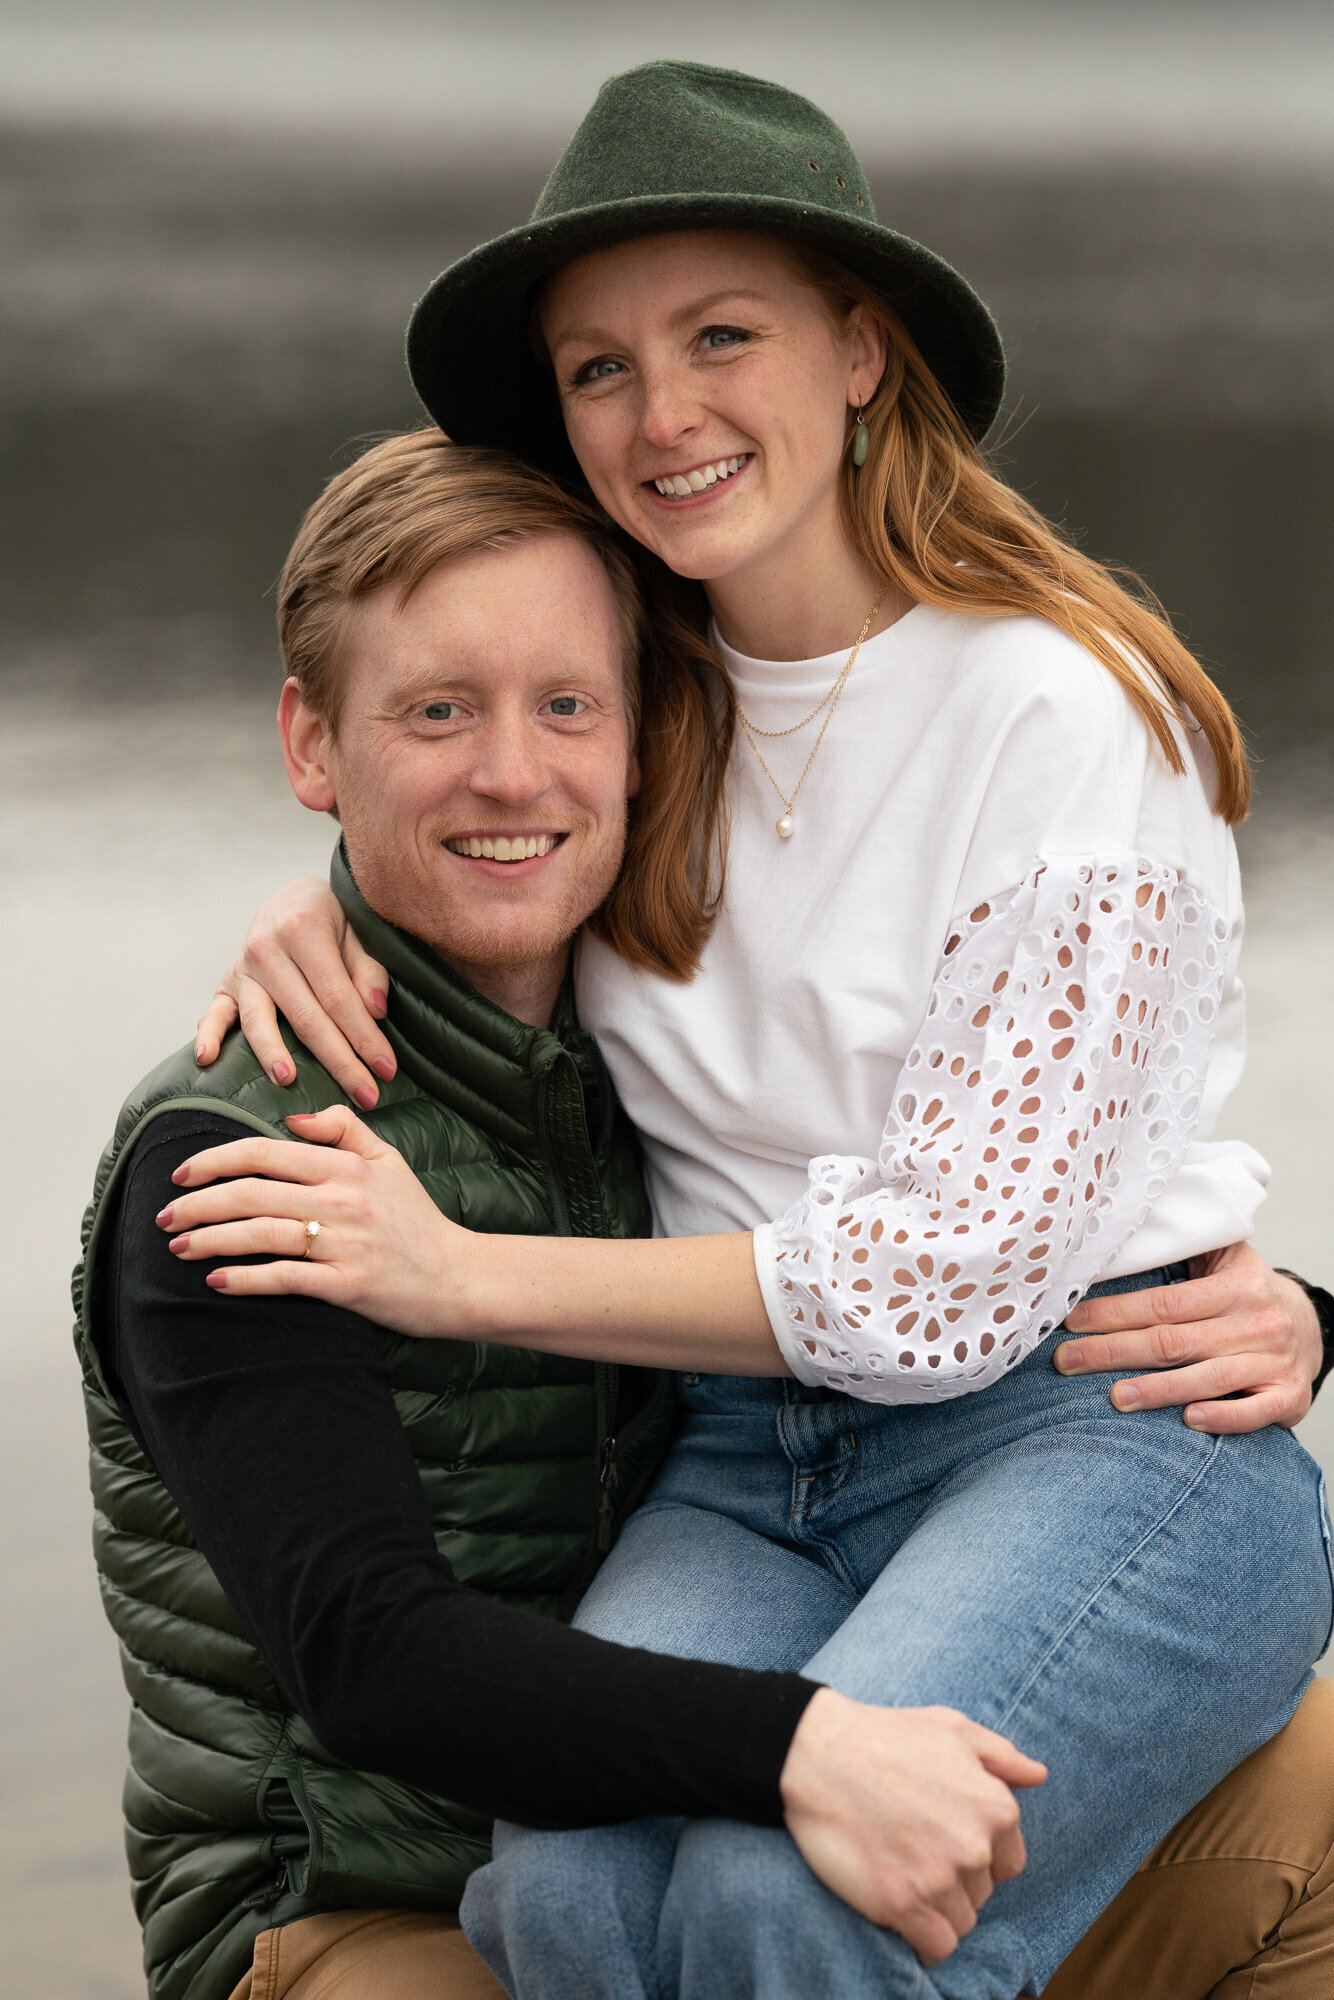 Woman wearing white sweater and green hat smiles while sitting on her fiancee's lap.